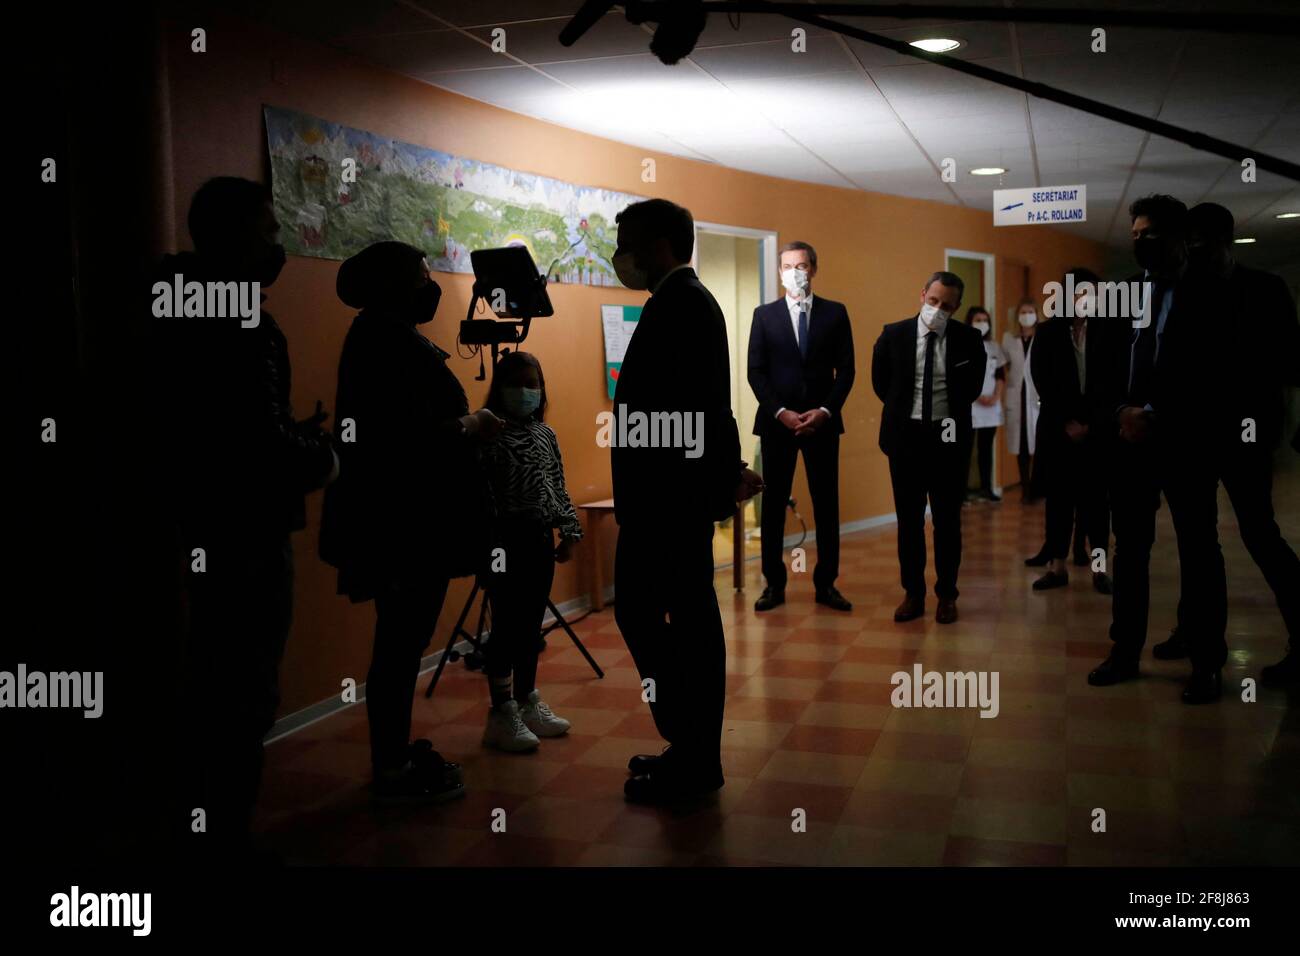 French President Emmanuel Macron visits a child psychiatry department at Reims hospital to discuss the psychological impact of the COVID-19 crisis and the lockdown on children and teenagers in France, April 14, 2021. Photo by Christian Hartmann/Pool/ABACAPRESS.COM Stock Photo